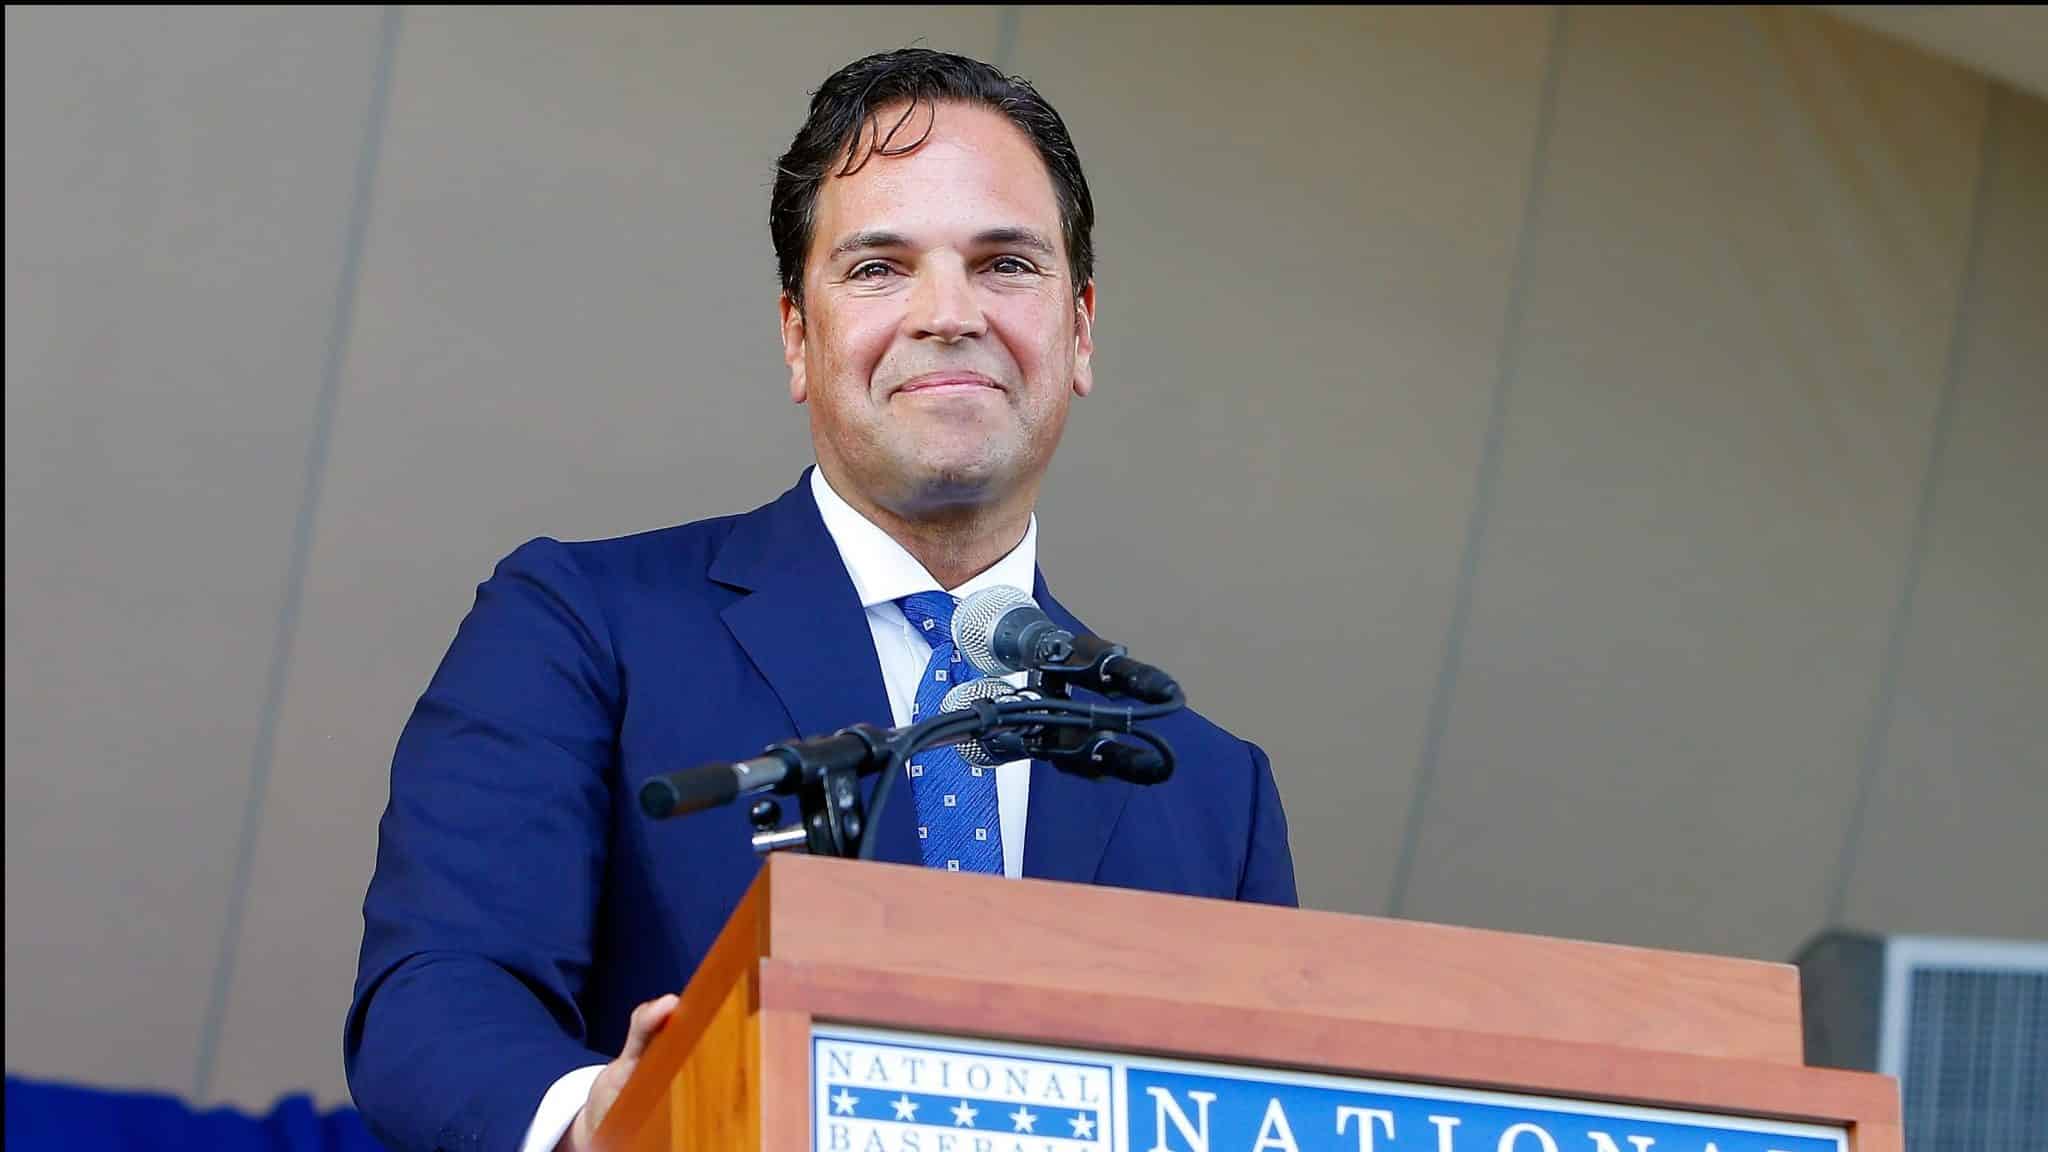 COOPERSTOWN, NY - JULY 24: Mike Piazza gives his induction speech at Clark Sports Center during the Baseball Hall of Fame induction ceremony on July 24, 2016 in Cooperstown, New York.